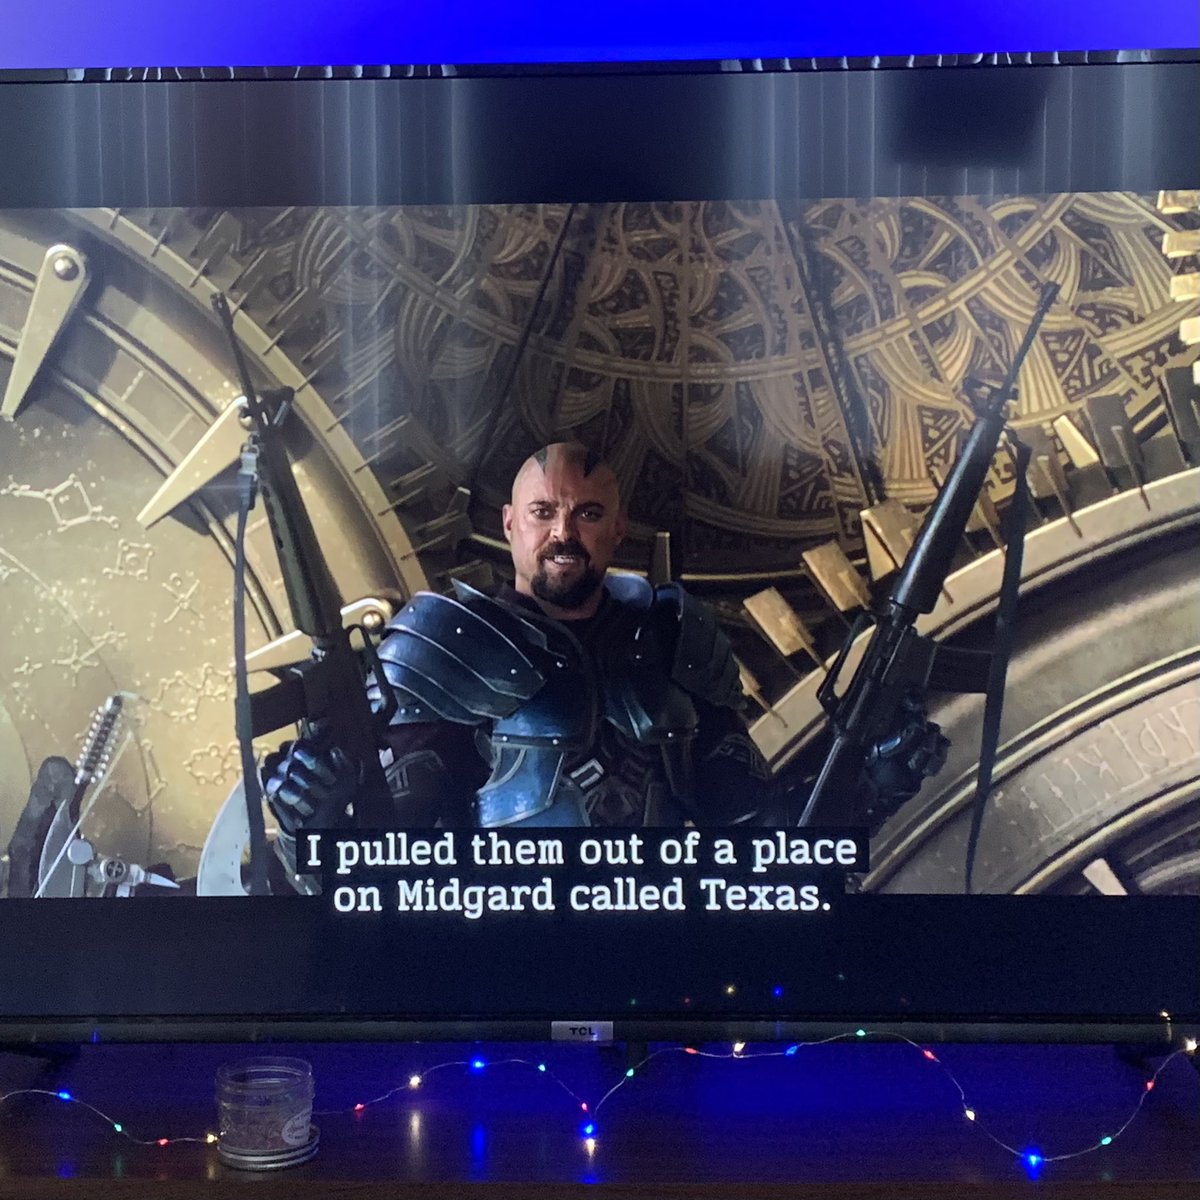 serious thor ragnarok question — when skurge says here his weapons from texas are “des” and “troy” that’s also gotta be a Dez Bryant-Troy Aikman joke too yeah? https://t.co/1aFEStEs5j